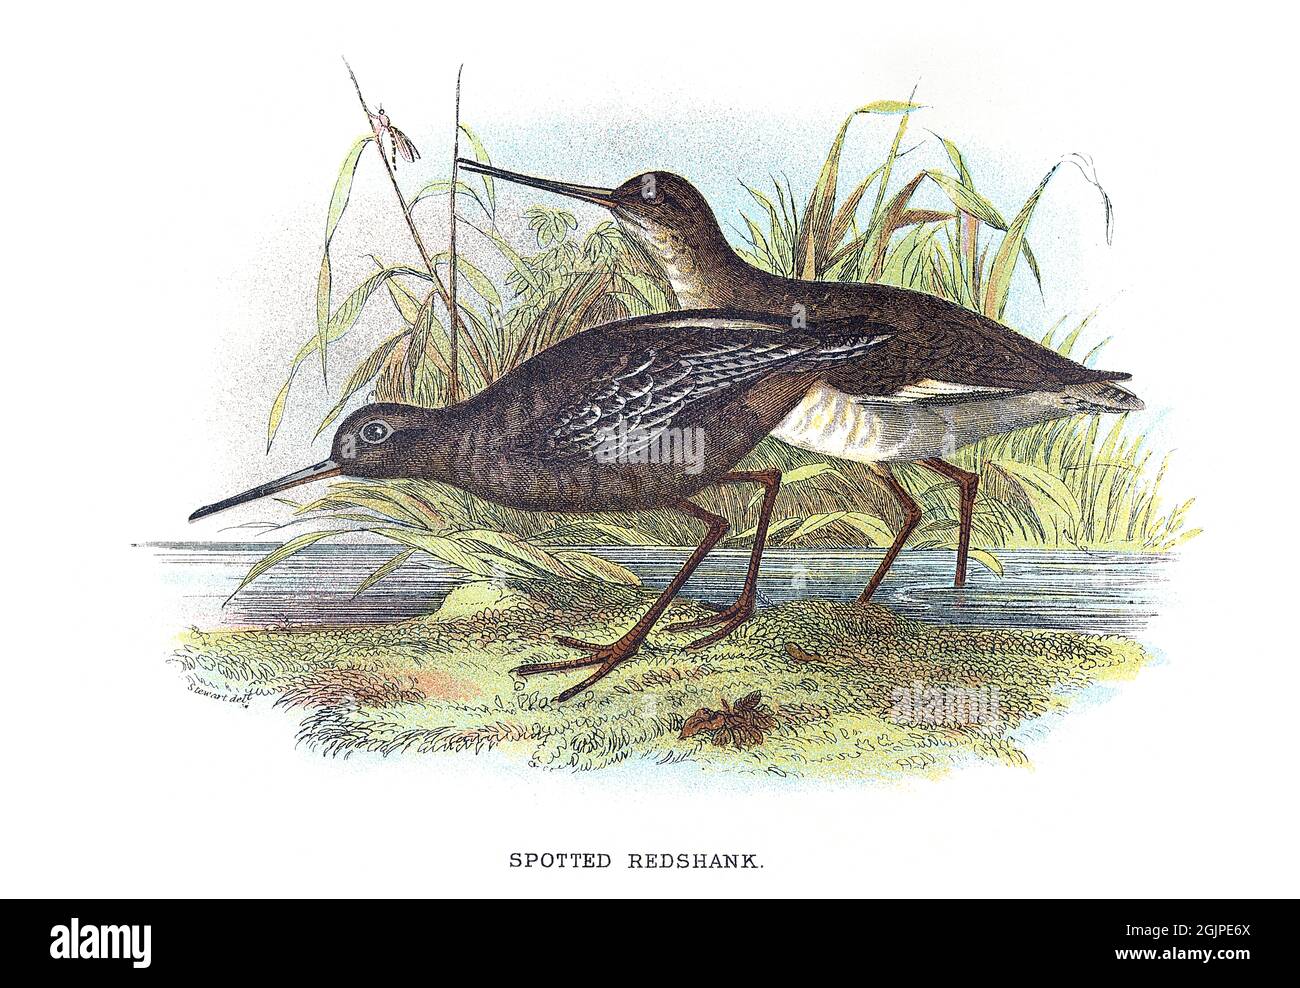 The spotted redshank, Tringa erythropus, is a wader (shorebird) in the large bird family Scolopacidae. Stock Photo